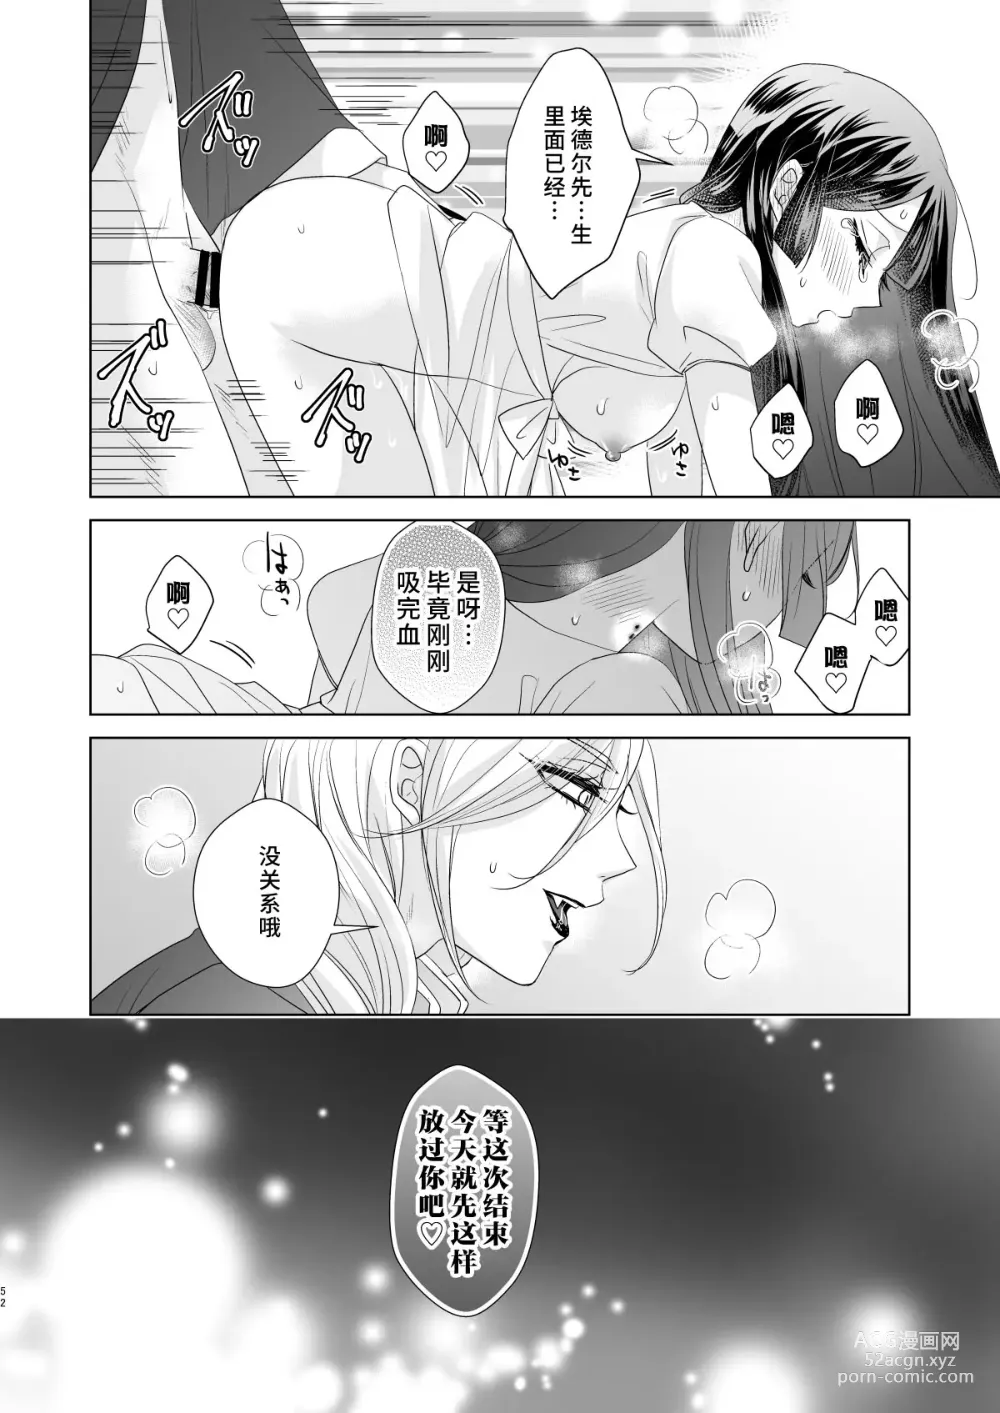 Page 51 of doujinshi 男大姐♂吸血鬼和少女